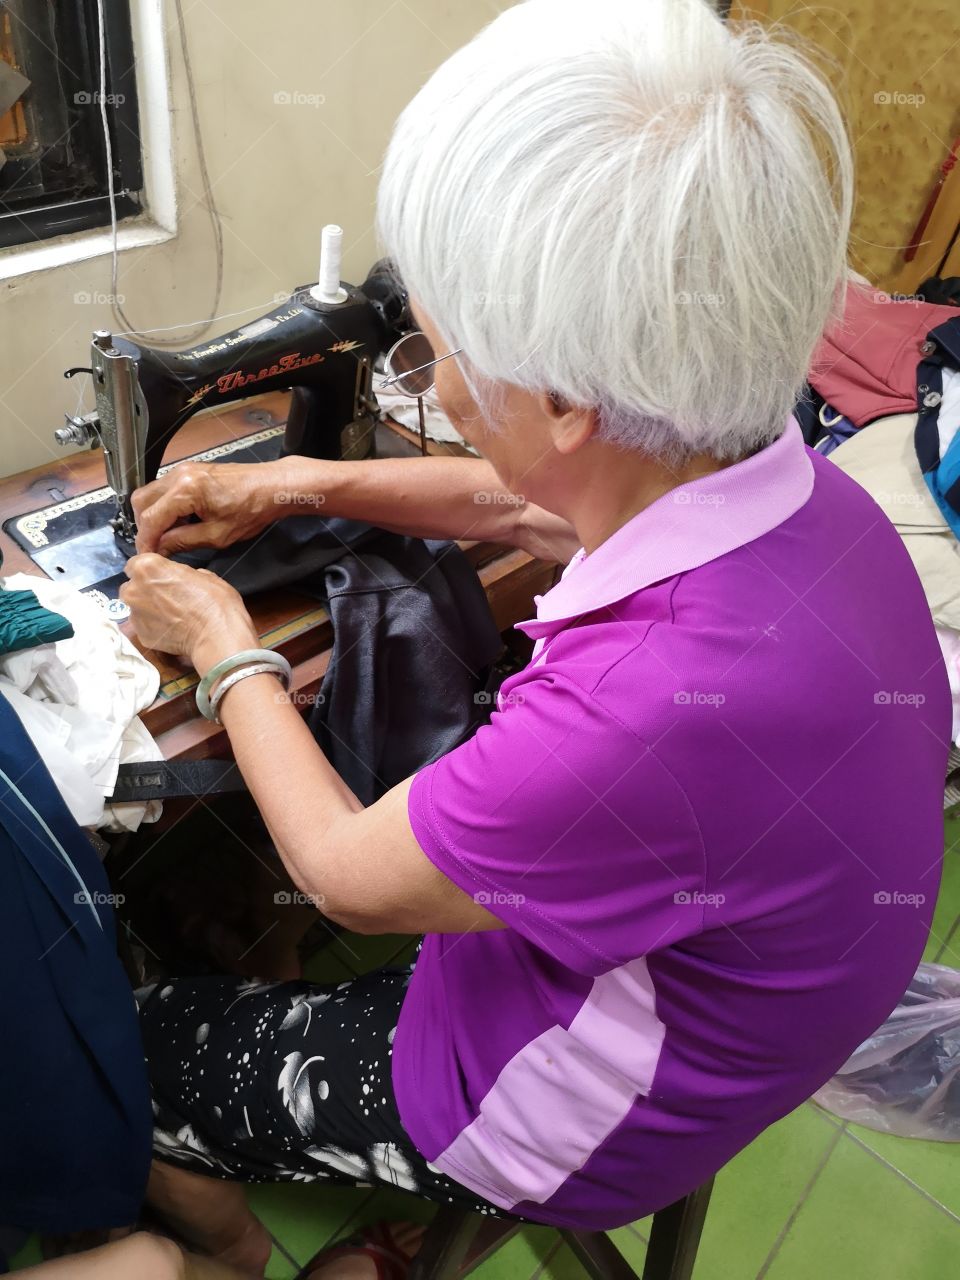 My grandmother use the old tailoring machine